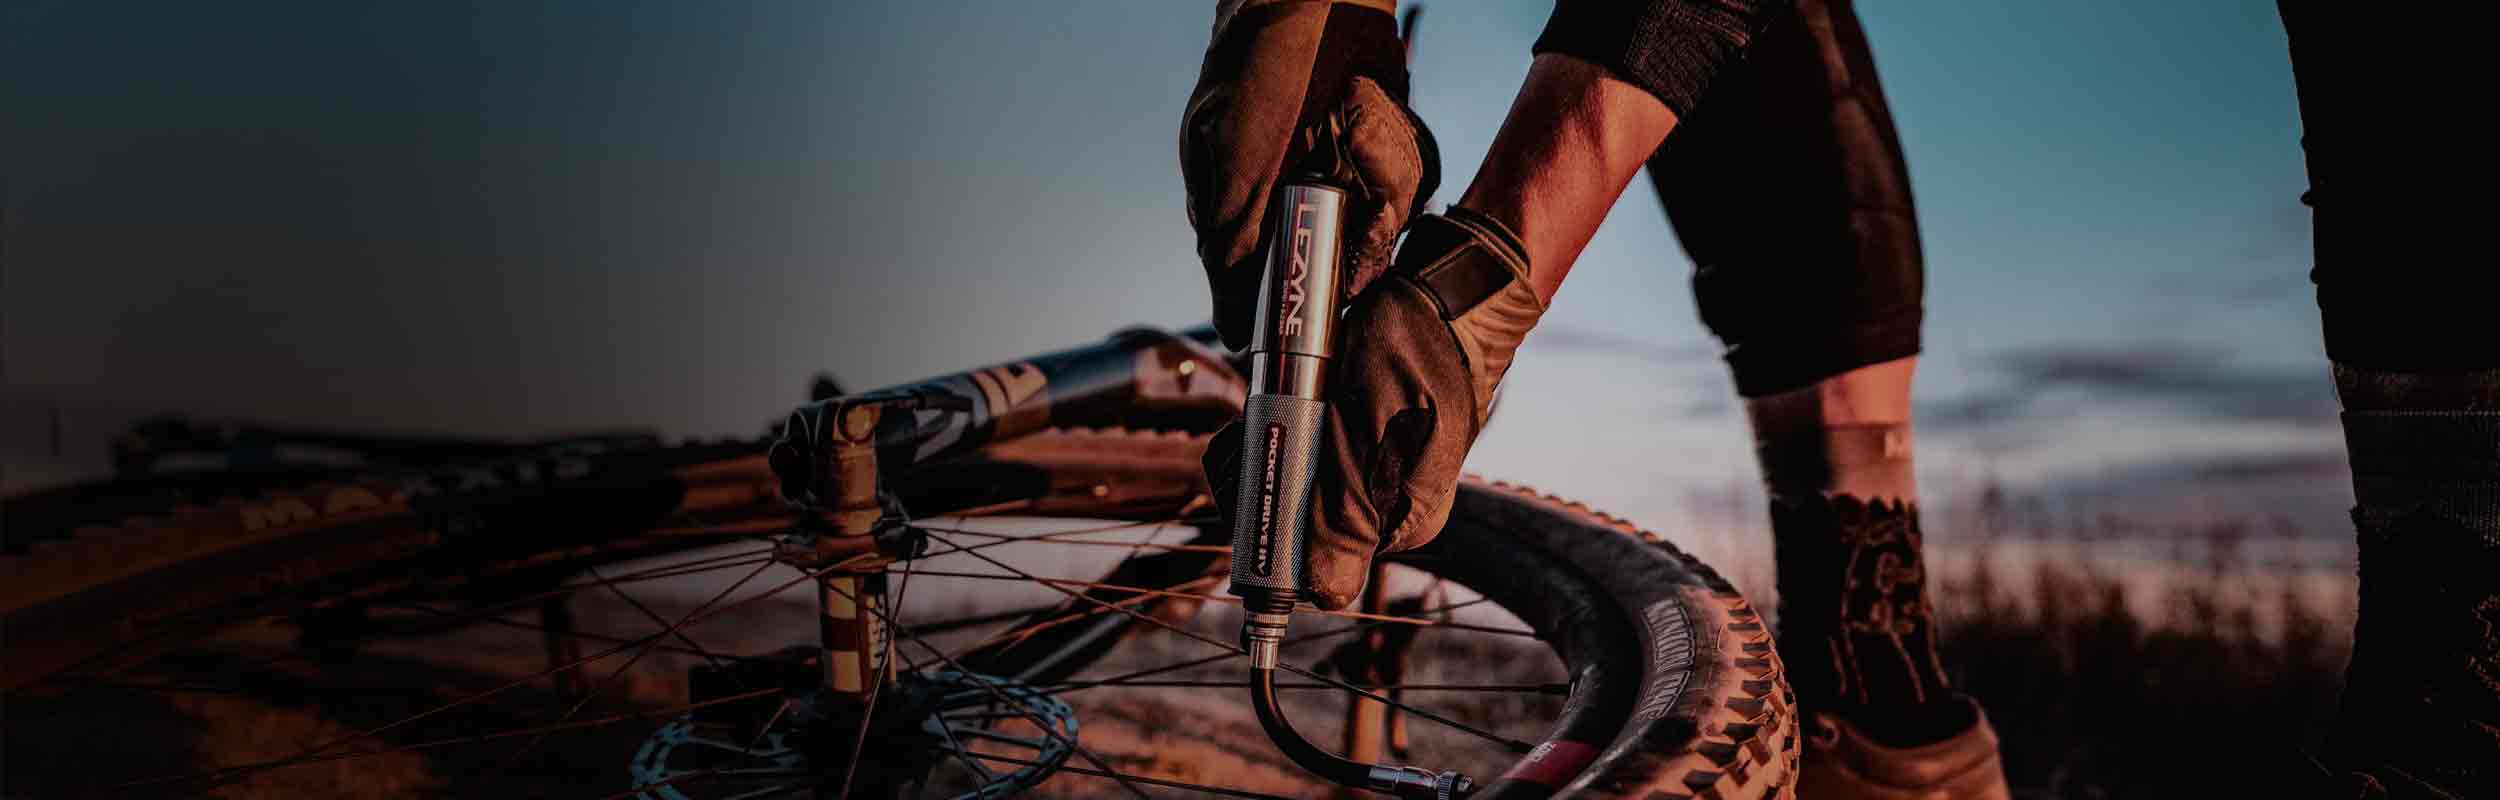 Gloved hands using a hand pump to inflate a bicycle tire.